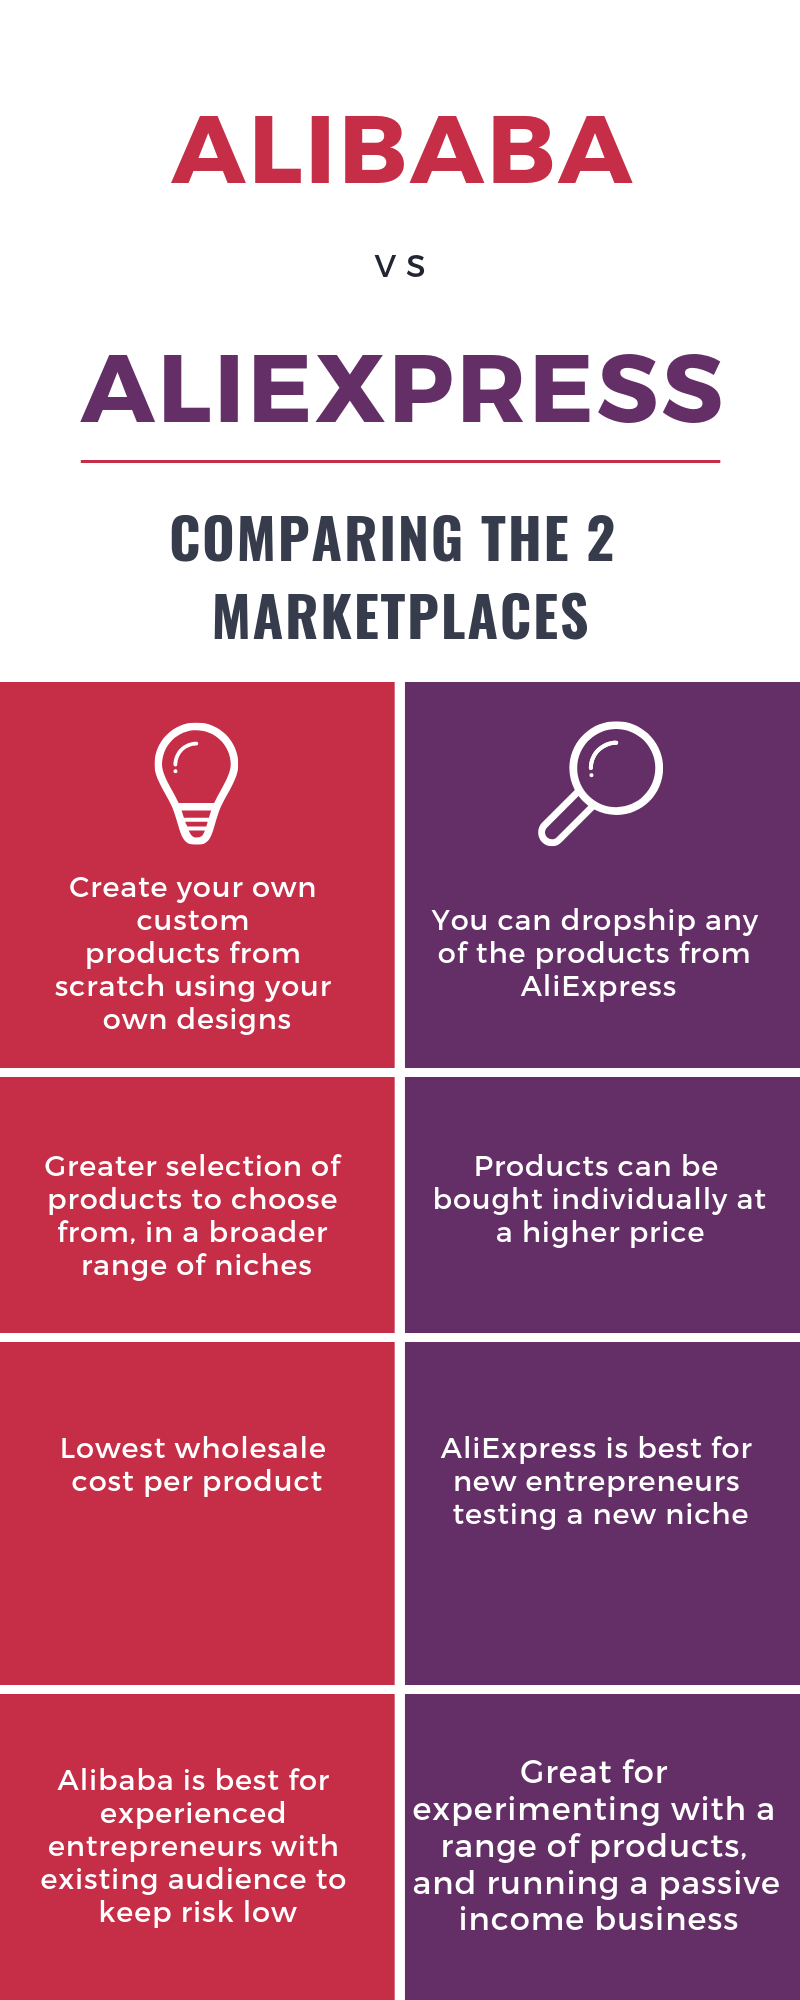 What's The Difference Between AliExpress and Alibaba?